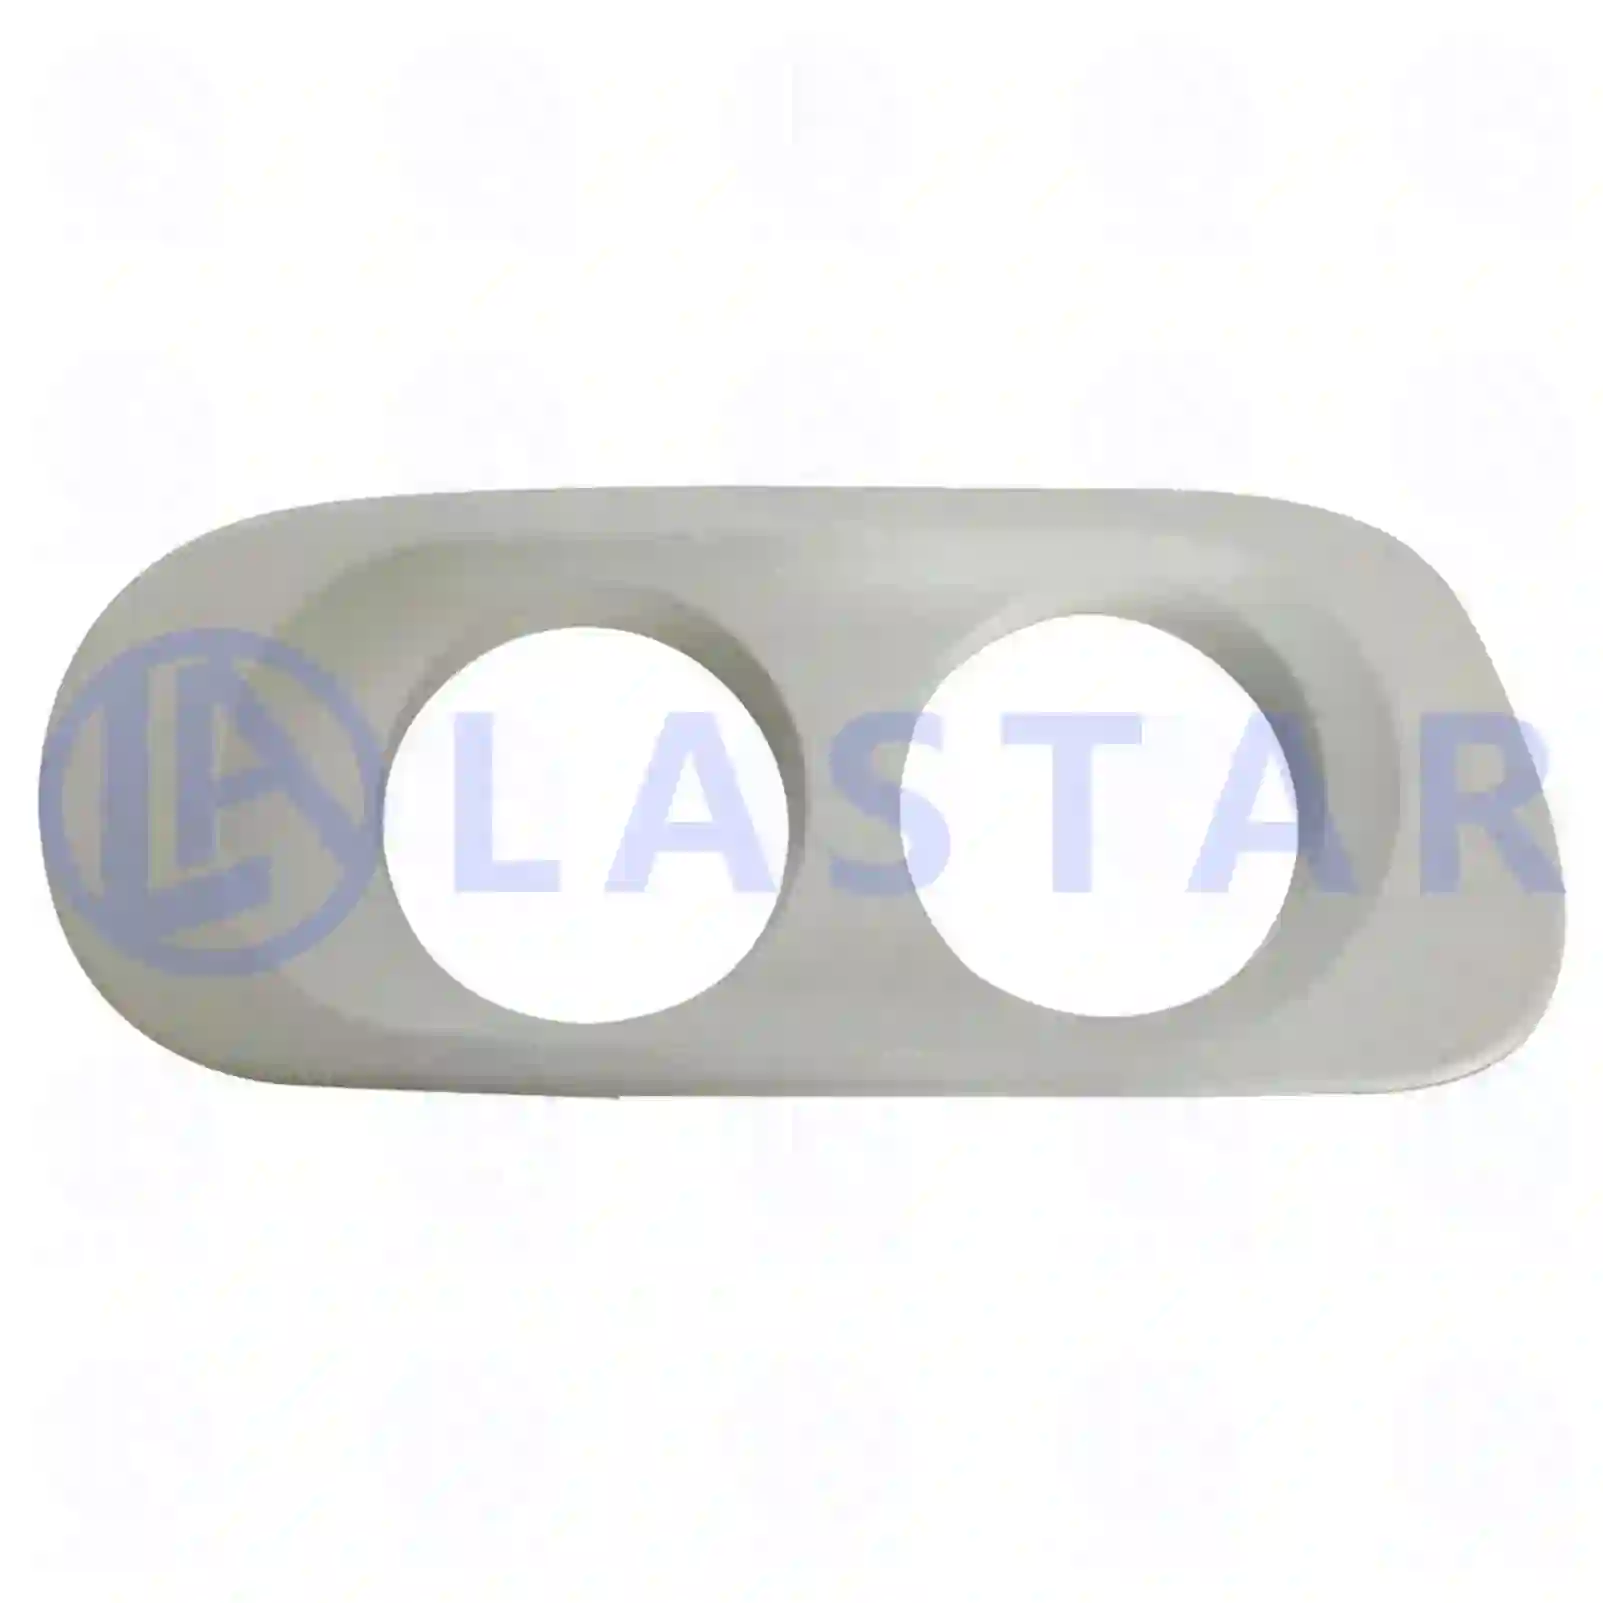 Bumper cover, auxiliary lamp, right, white, 77719804, 1649364, 1683722, ZG60195-0008 ||  77719804 Lastar Spare Part | Truck Spare Parts, Auotomotive Spare Parts Bumper cover, auxiliary lamp, right, white, 77719804, 1649364, 1683722, ZG60195-0008 ||  77719804 Lastar Spare Part | Truck Spare Parts, Auotomotive Spare Parts